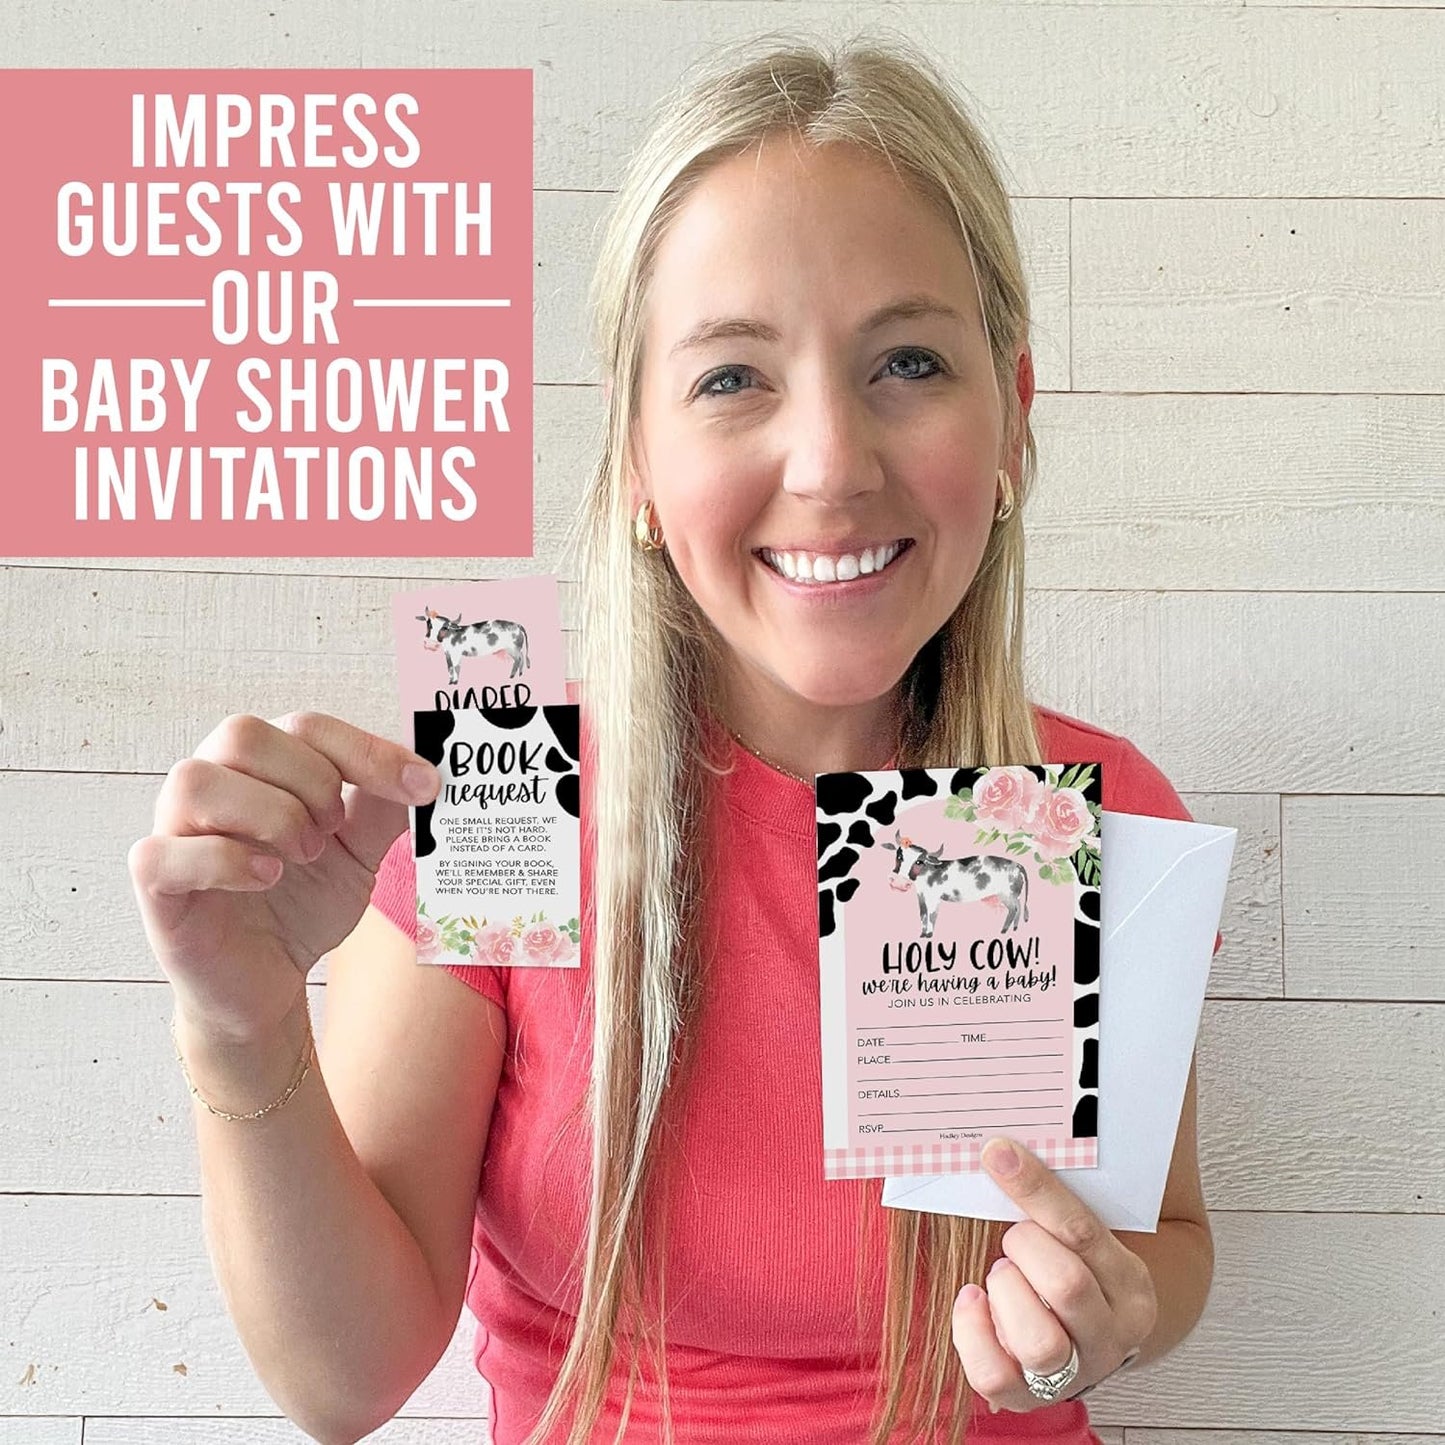 15 Holy Cow Baby Shower Invitations For Girl - Baby Girl Baby Shower Invites For Girl Baby Shower Invitations, Baby Girl Shower Invitations, Invitations For Baby Shower Girl, Baby Invitations